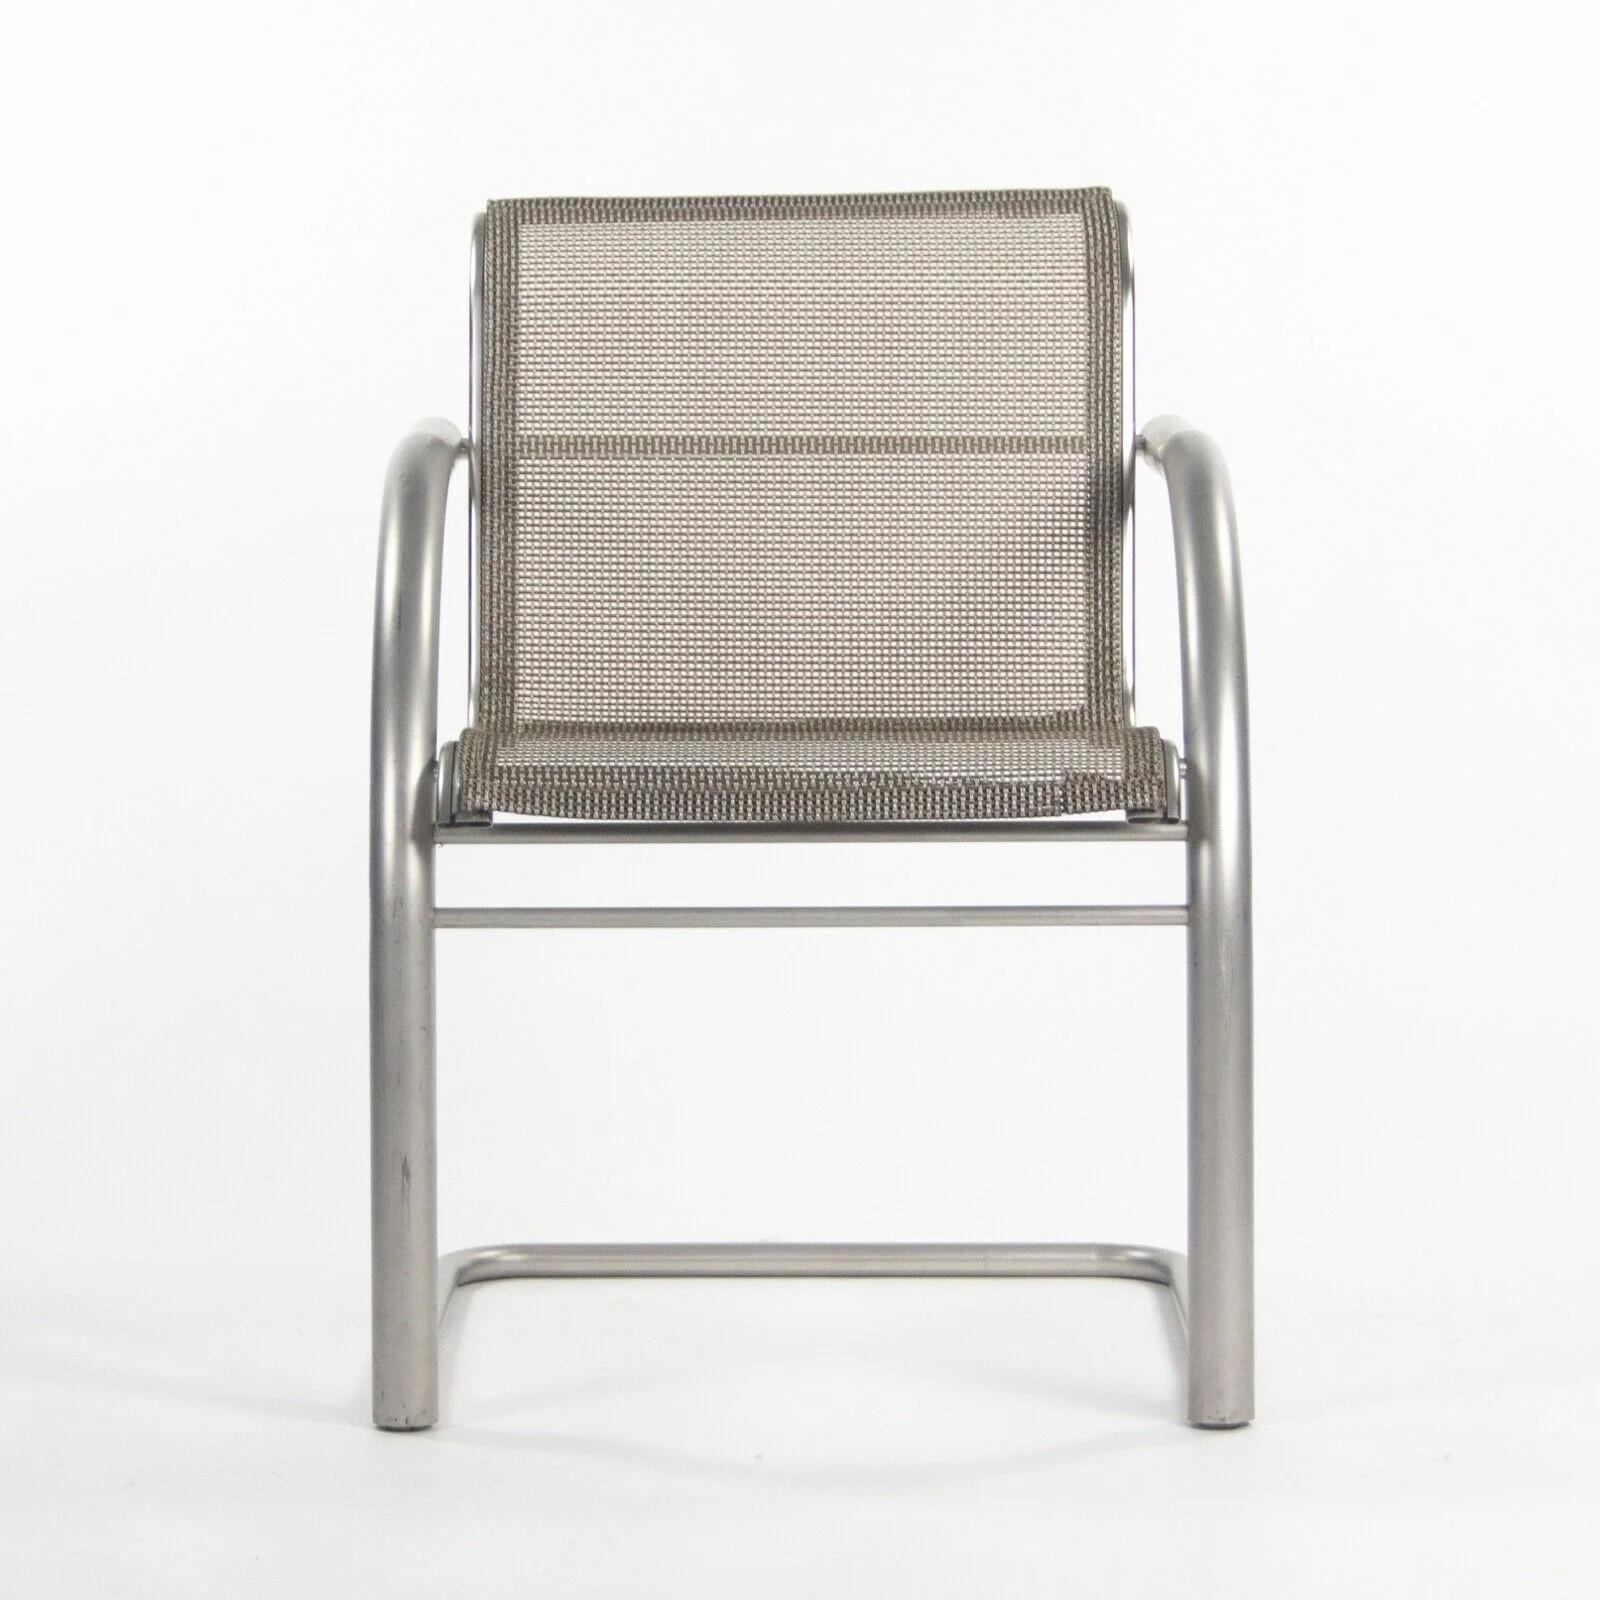 Listed for sale is a Richard Schultz 2002 Collection stainless steel cantilever dining chair prototype with mesh upholstery. This is a marvelous and rare example of a 2002 collection dining chair. The stainless steel frame is in terrific shape and